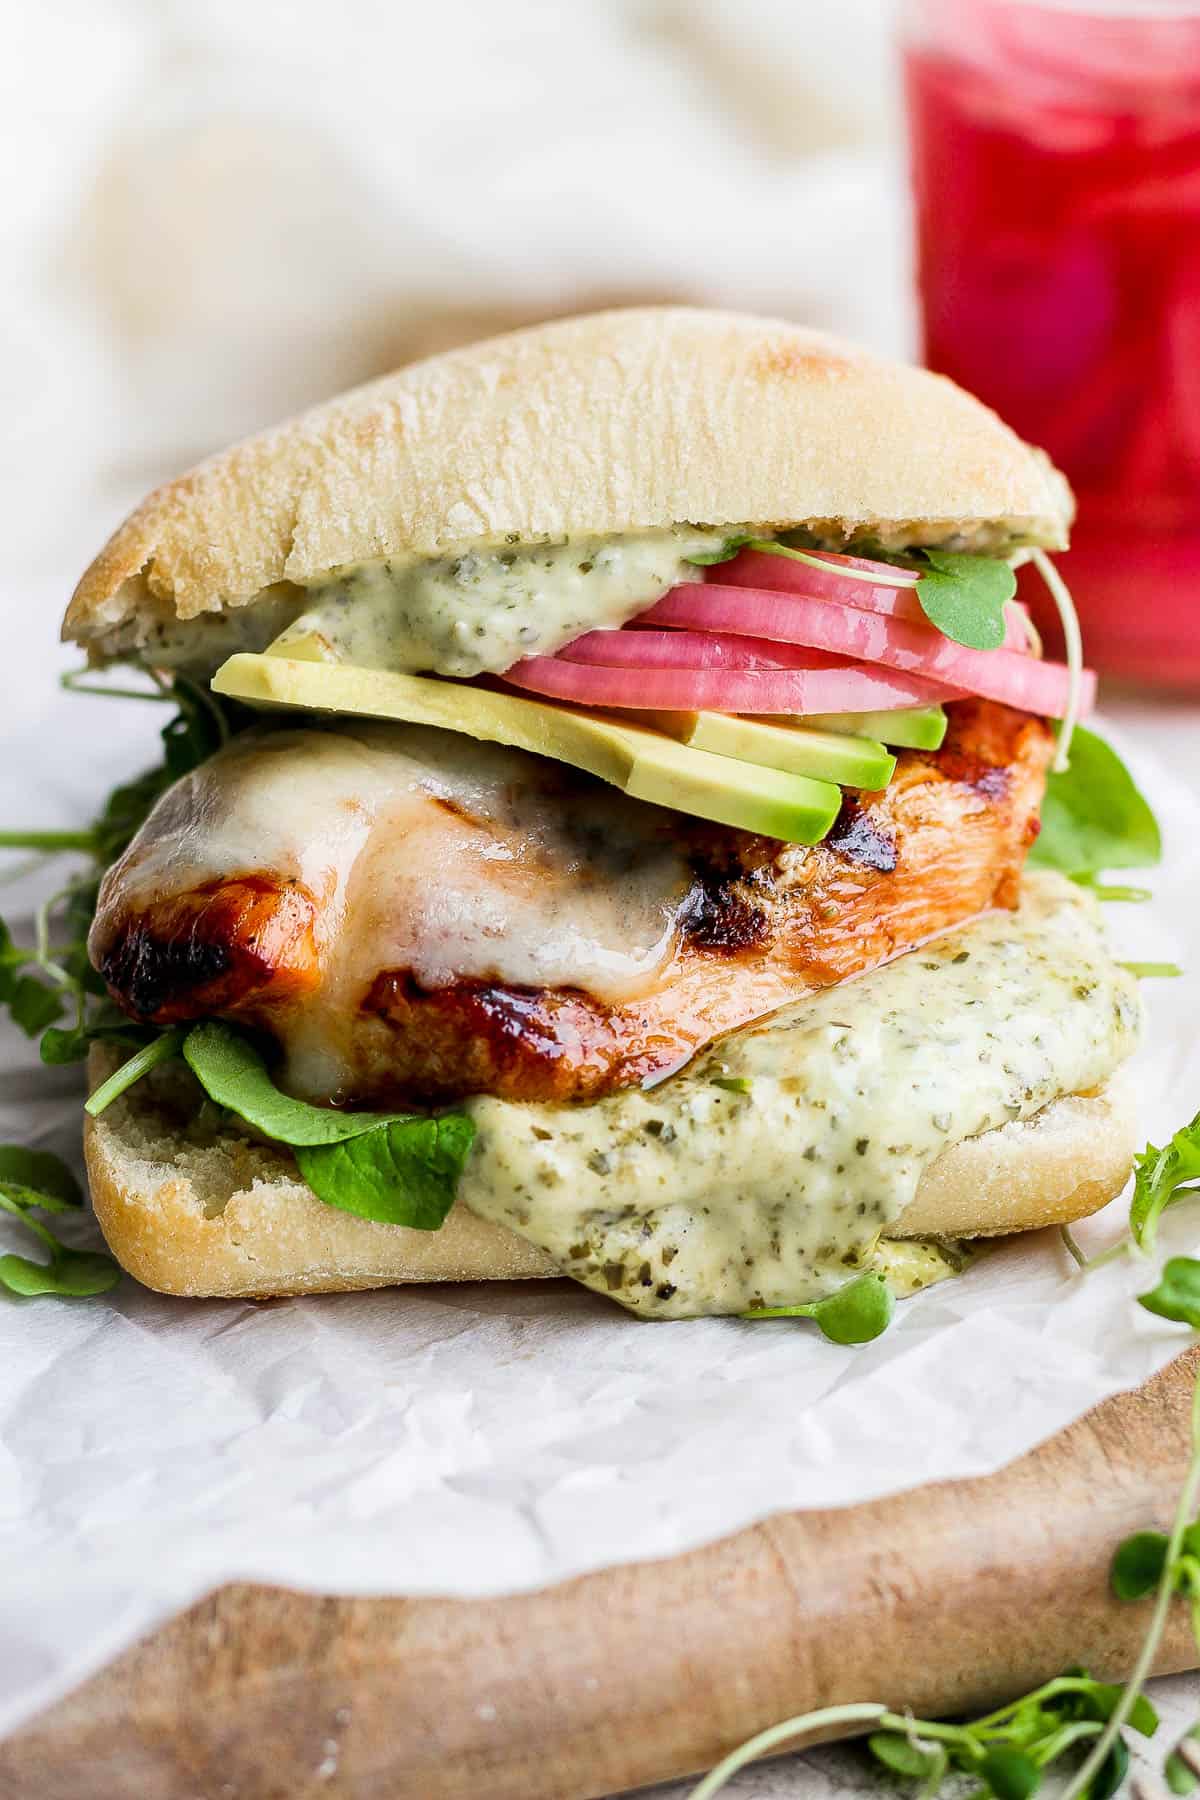 Pesto aioli on an ultimate grilled chicken sandwich.